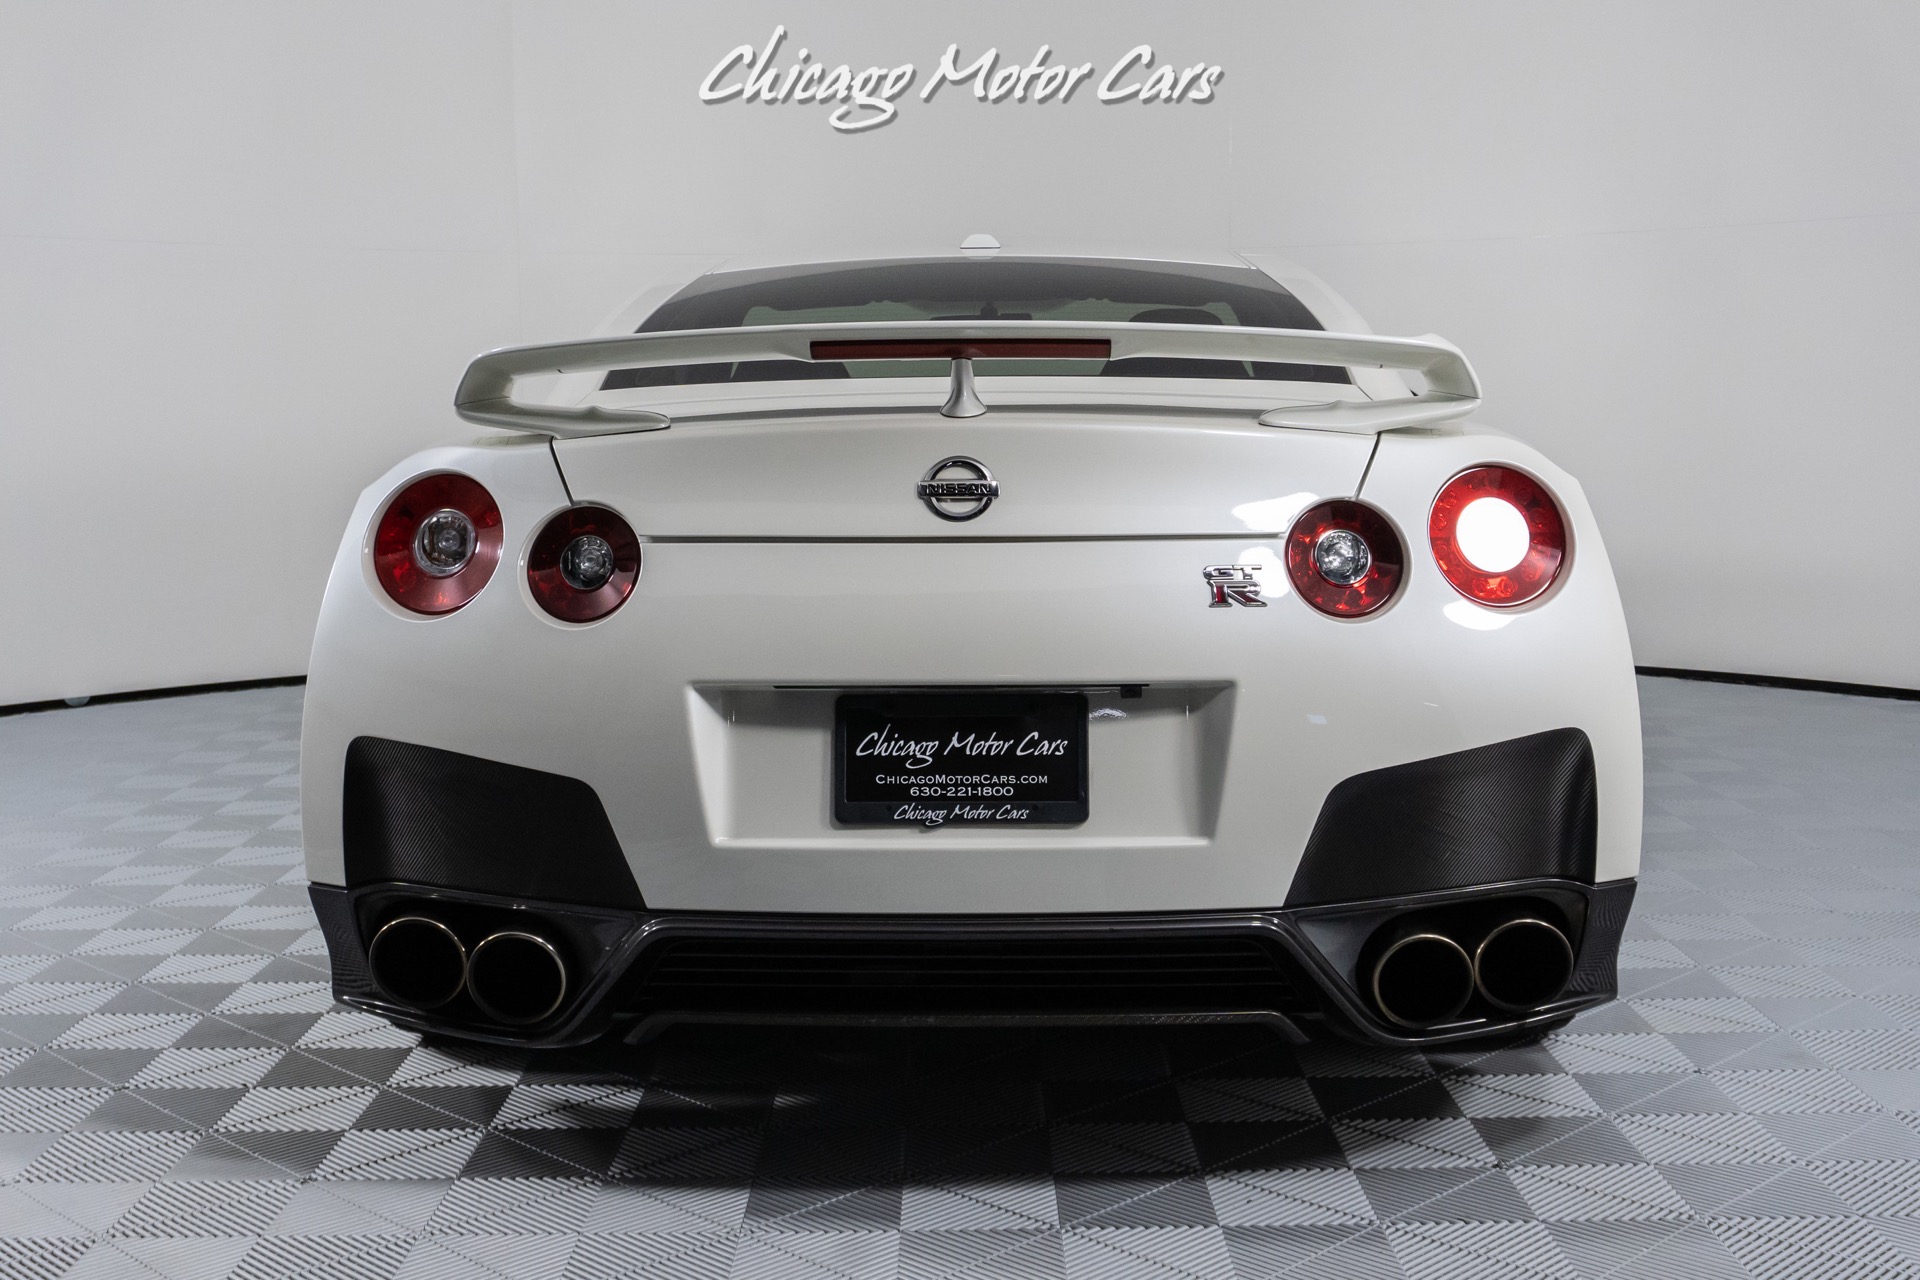 Used-2014-Nissan-GT-R-PREMIUM-SWITZER-MODIFIED-STREET-EDITION-UPGRADED-TURBOS-1125-WHP